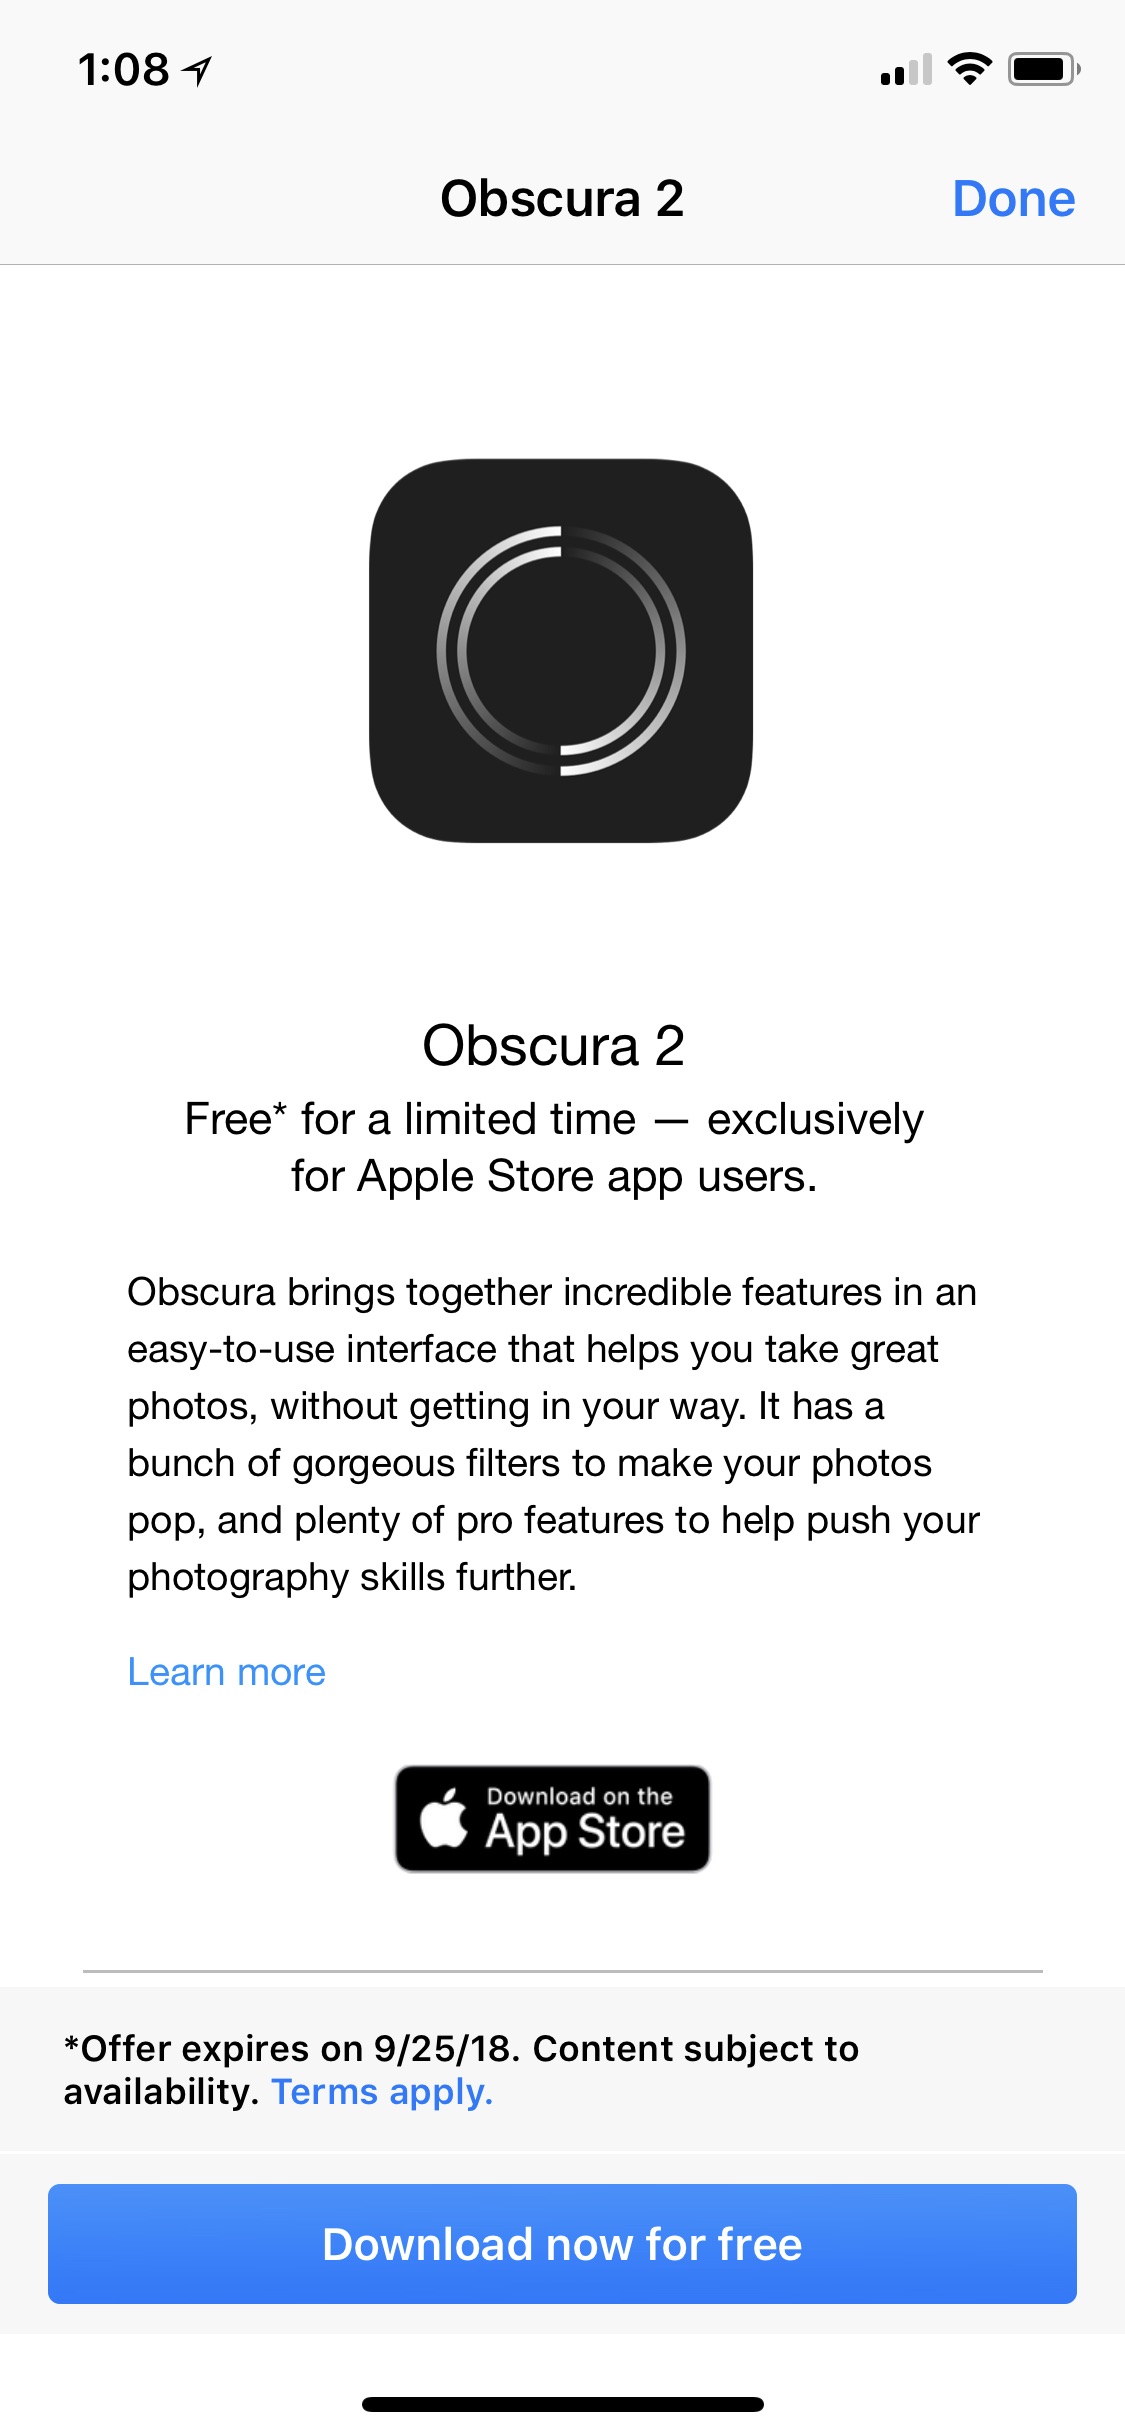   Apple offers "Obscura 2 Camera App" as a free download! 